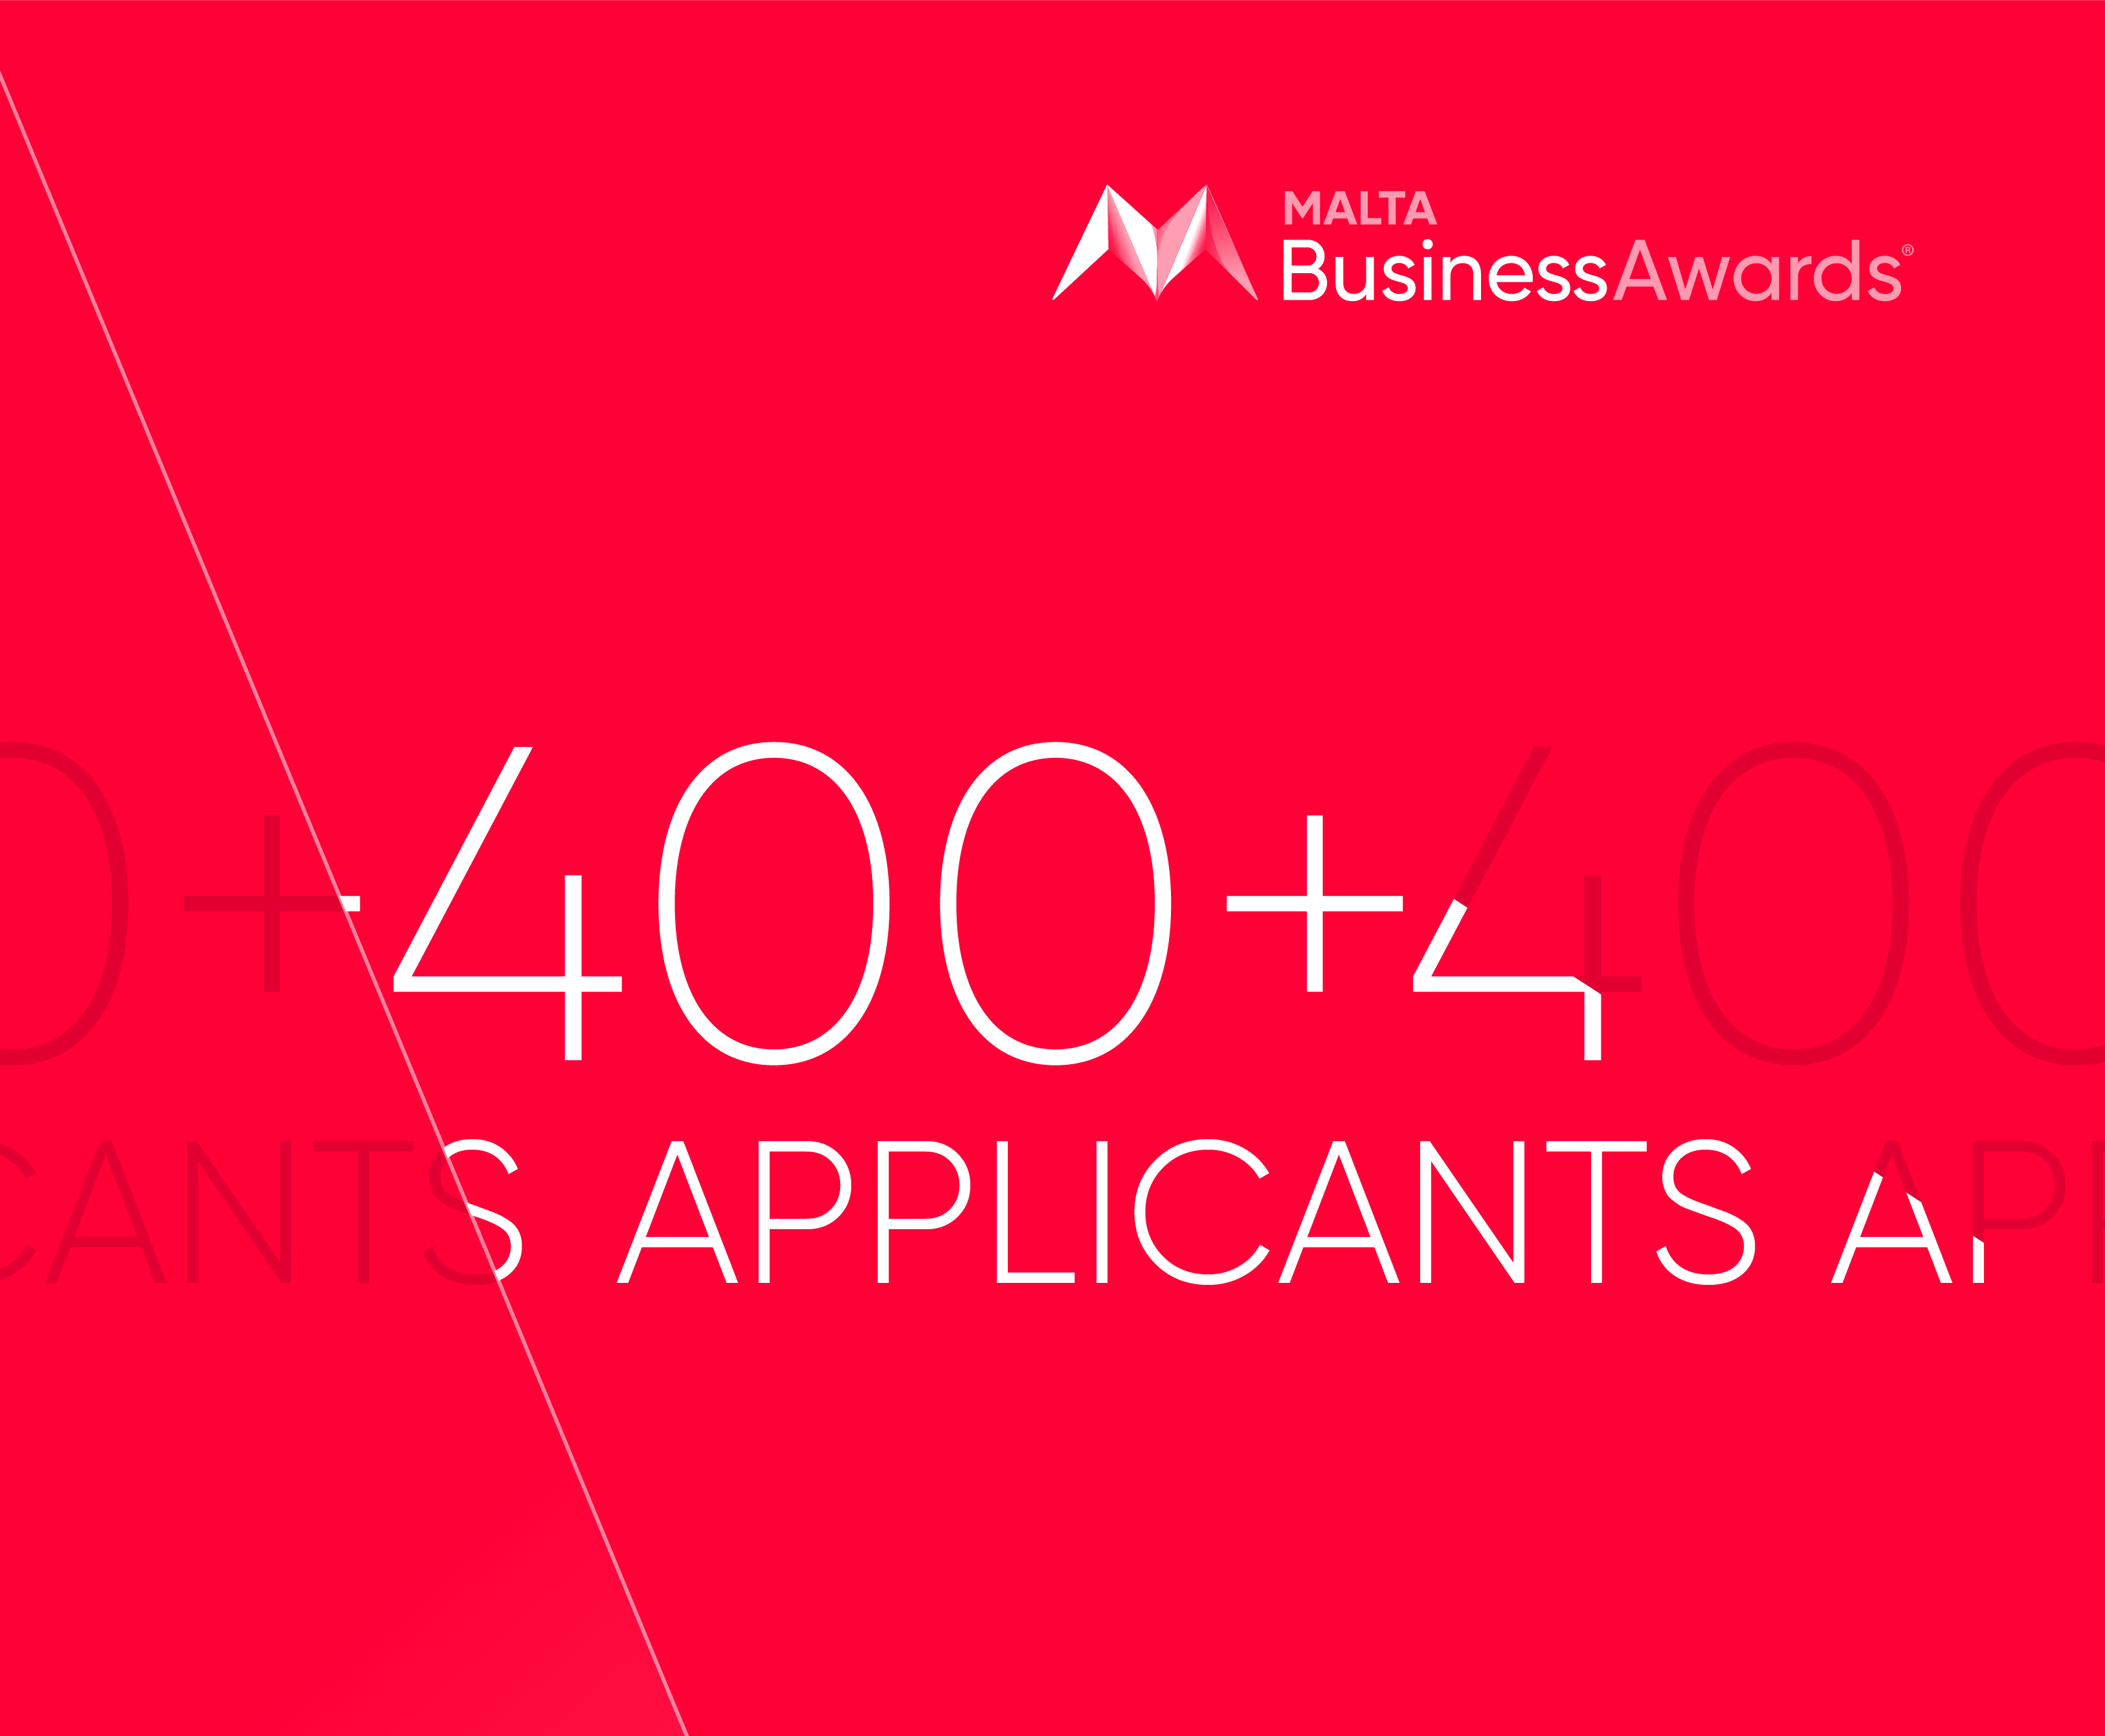 Over 400 applications received for the 2nd edition of the Malta Business Awards